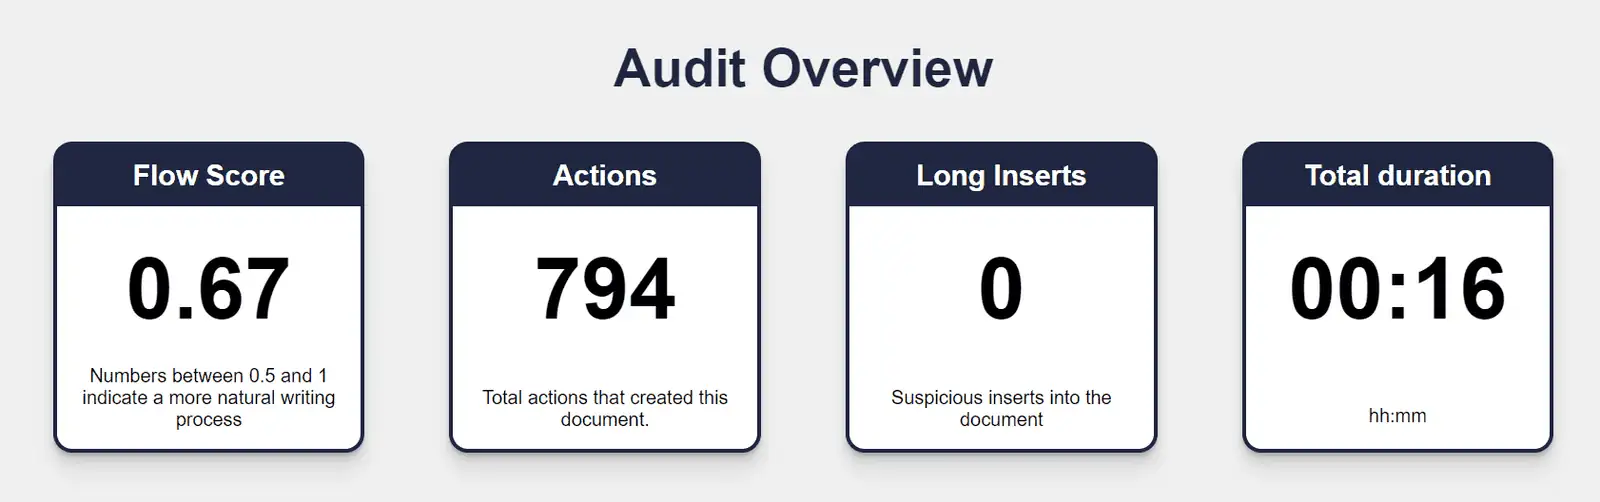 Passed AI Audit Overview, my content